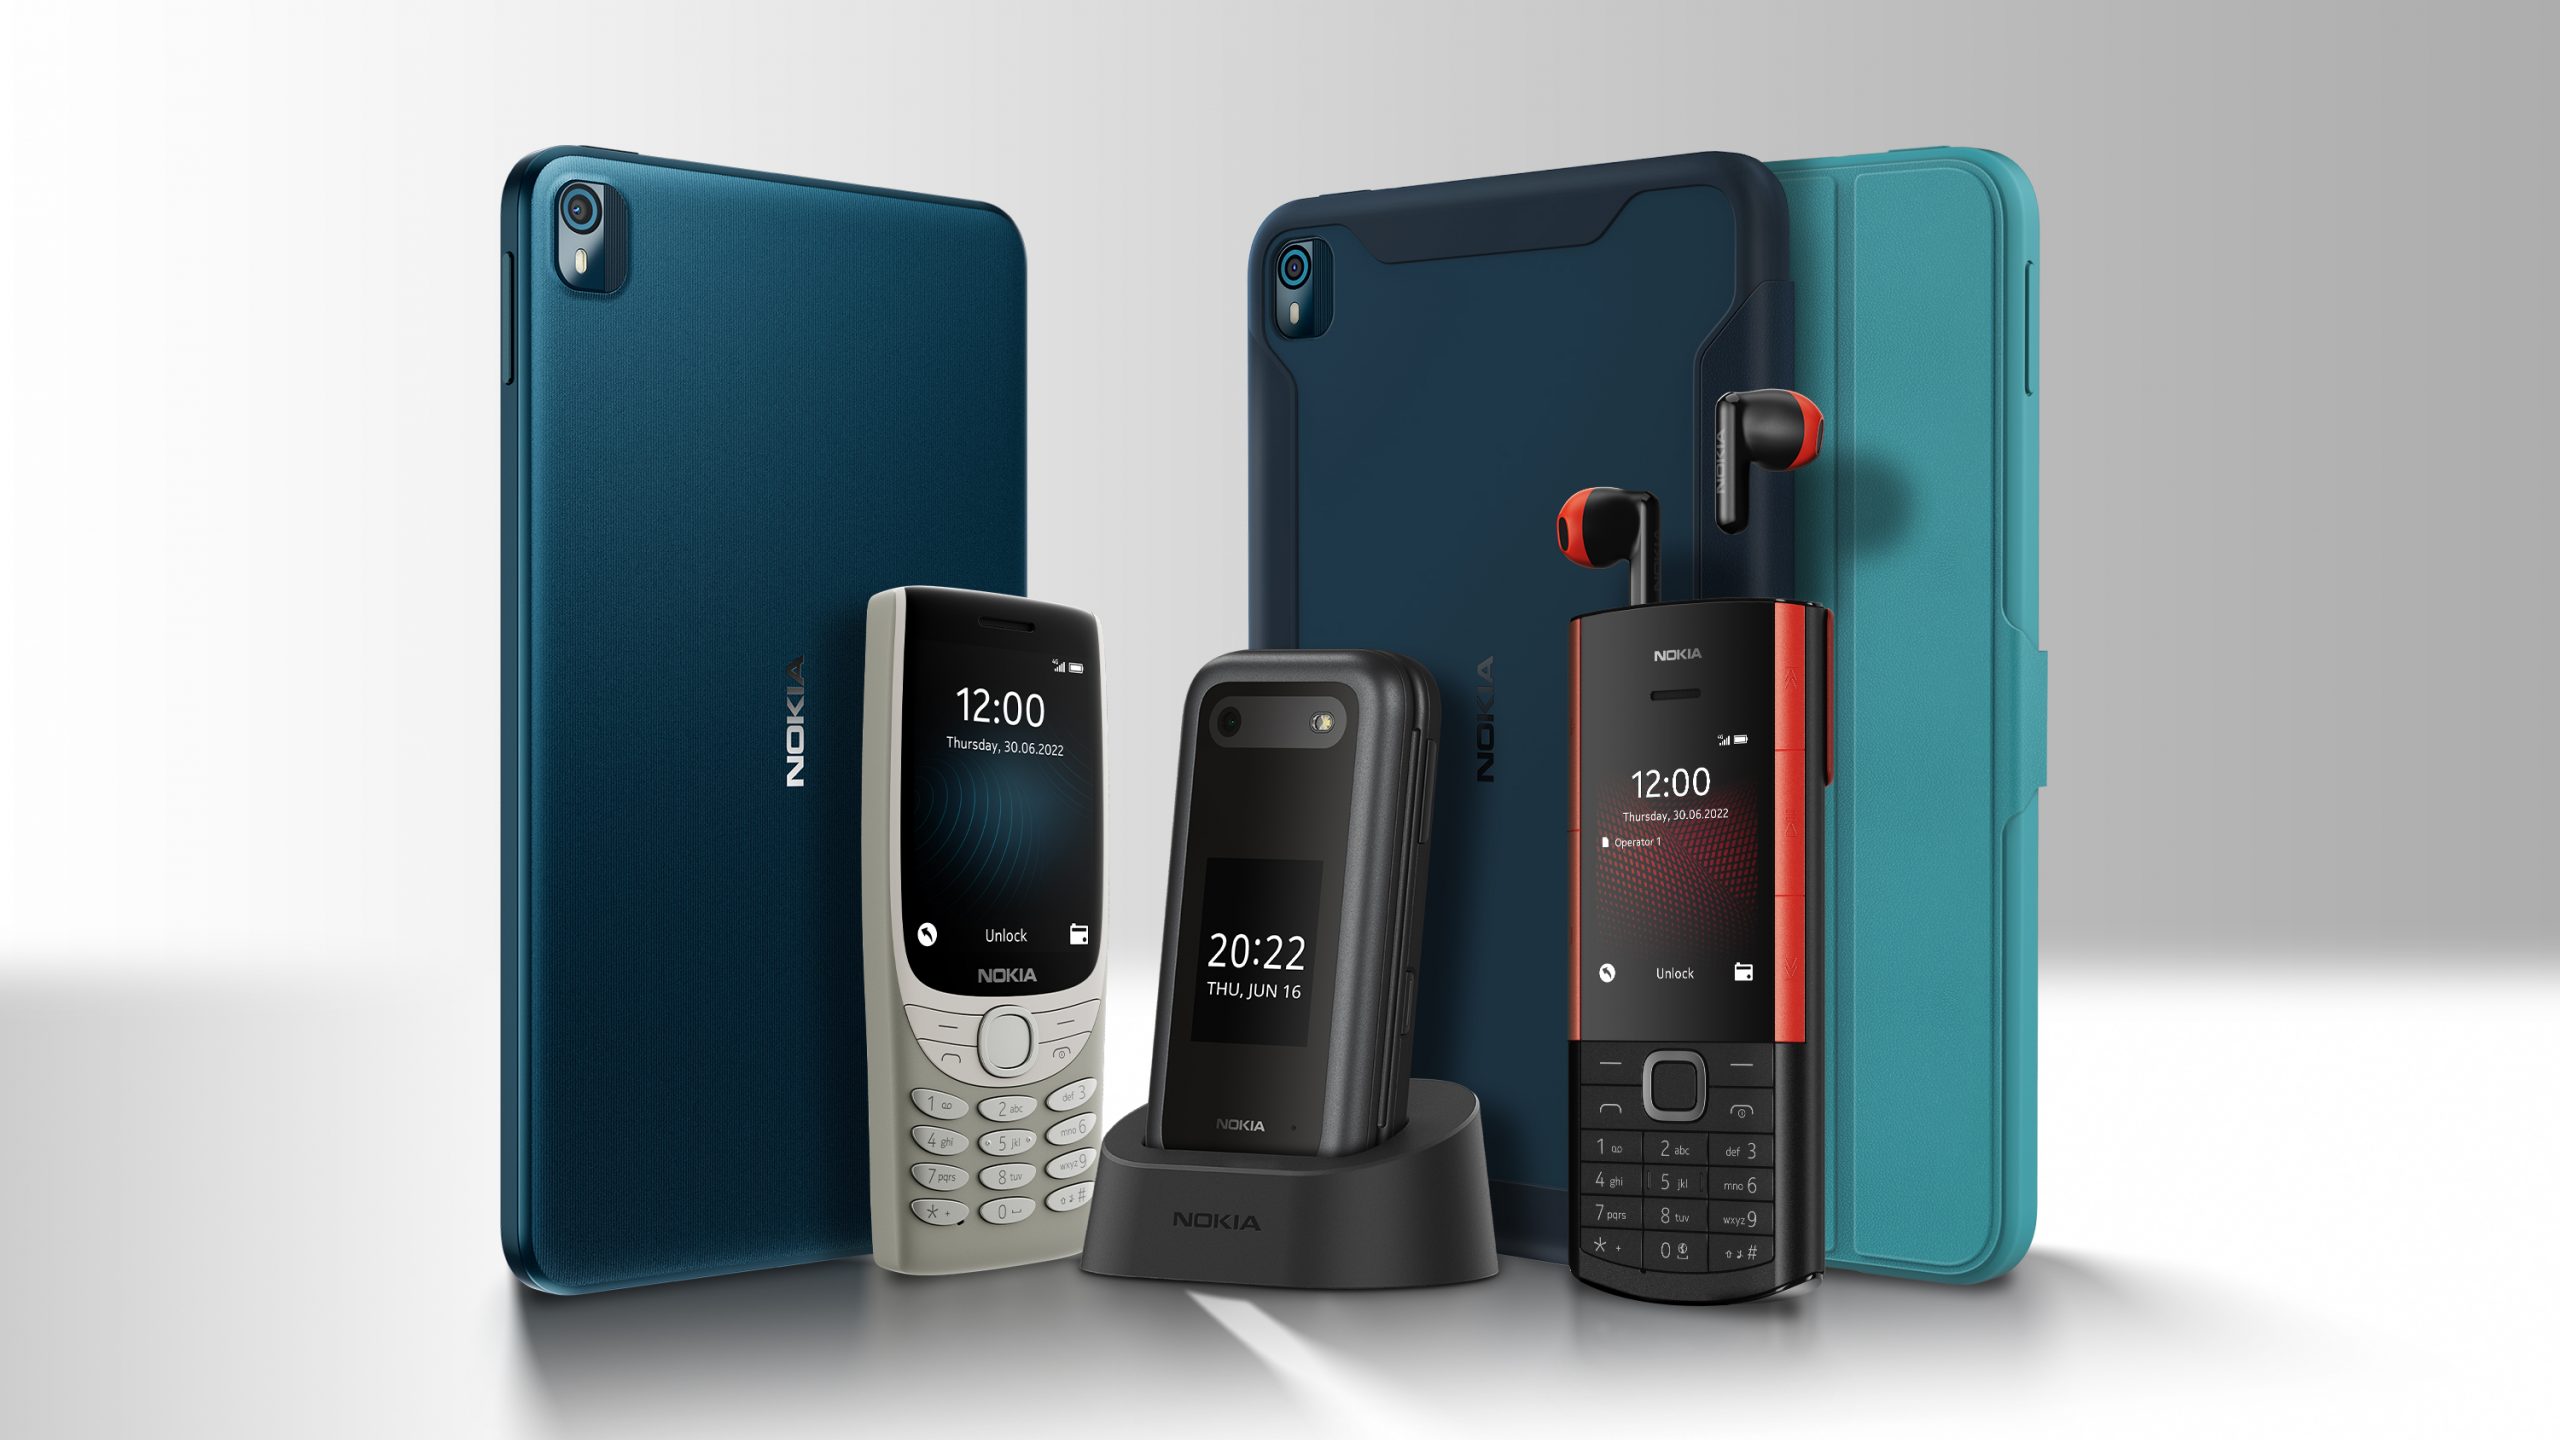 Three new Nokia iconic feature phones and a new Nokia tablet enhance HMD